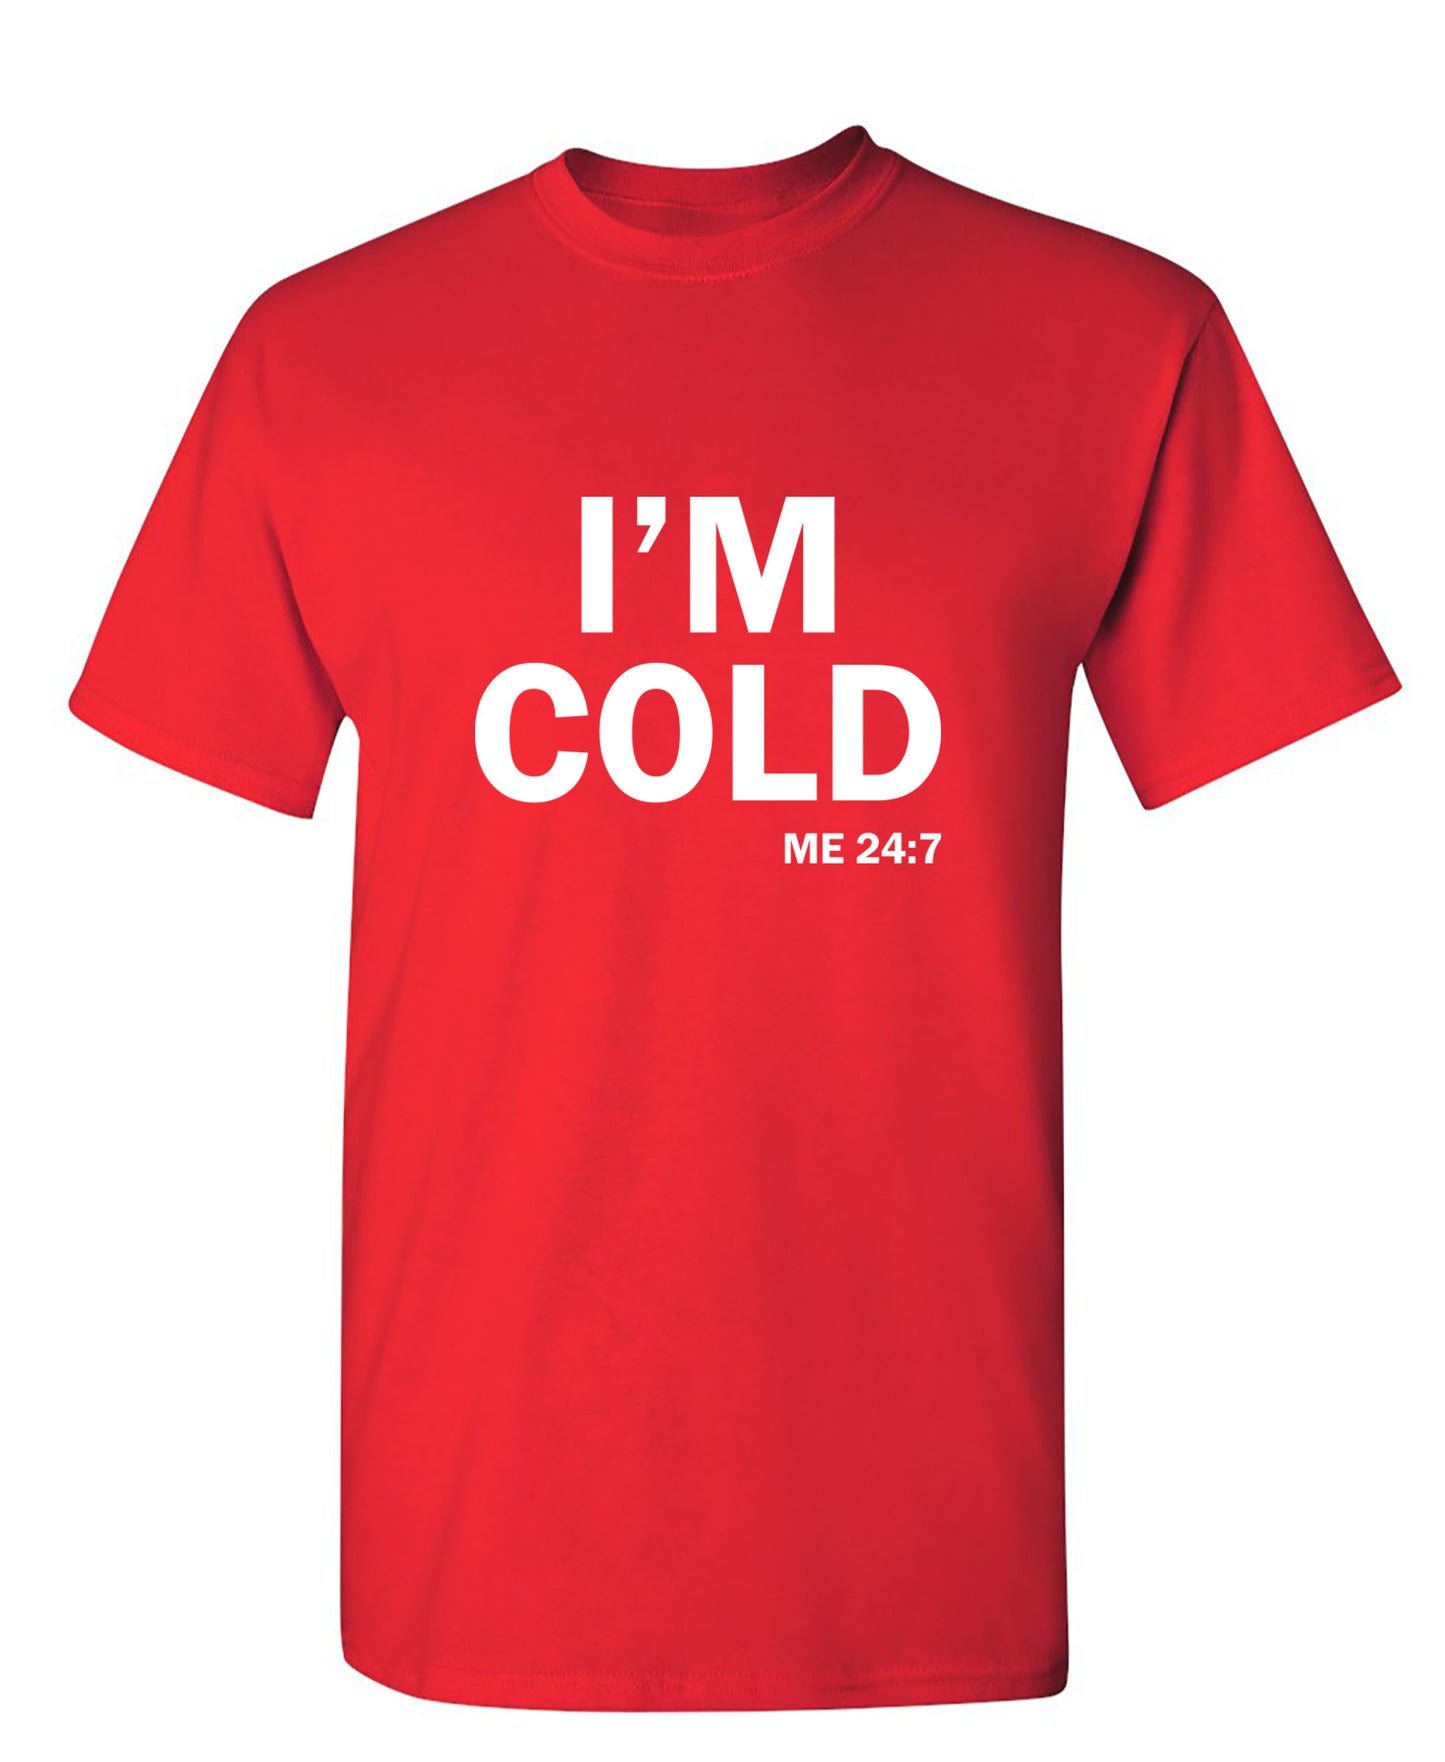 I'm Cold - Funny T Shirts & Graphic Tees